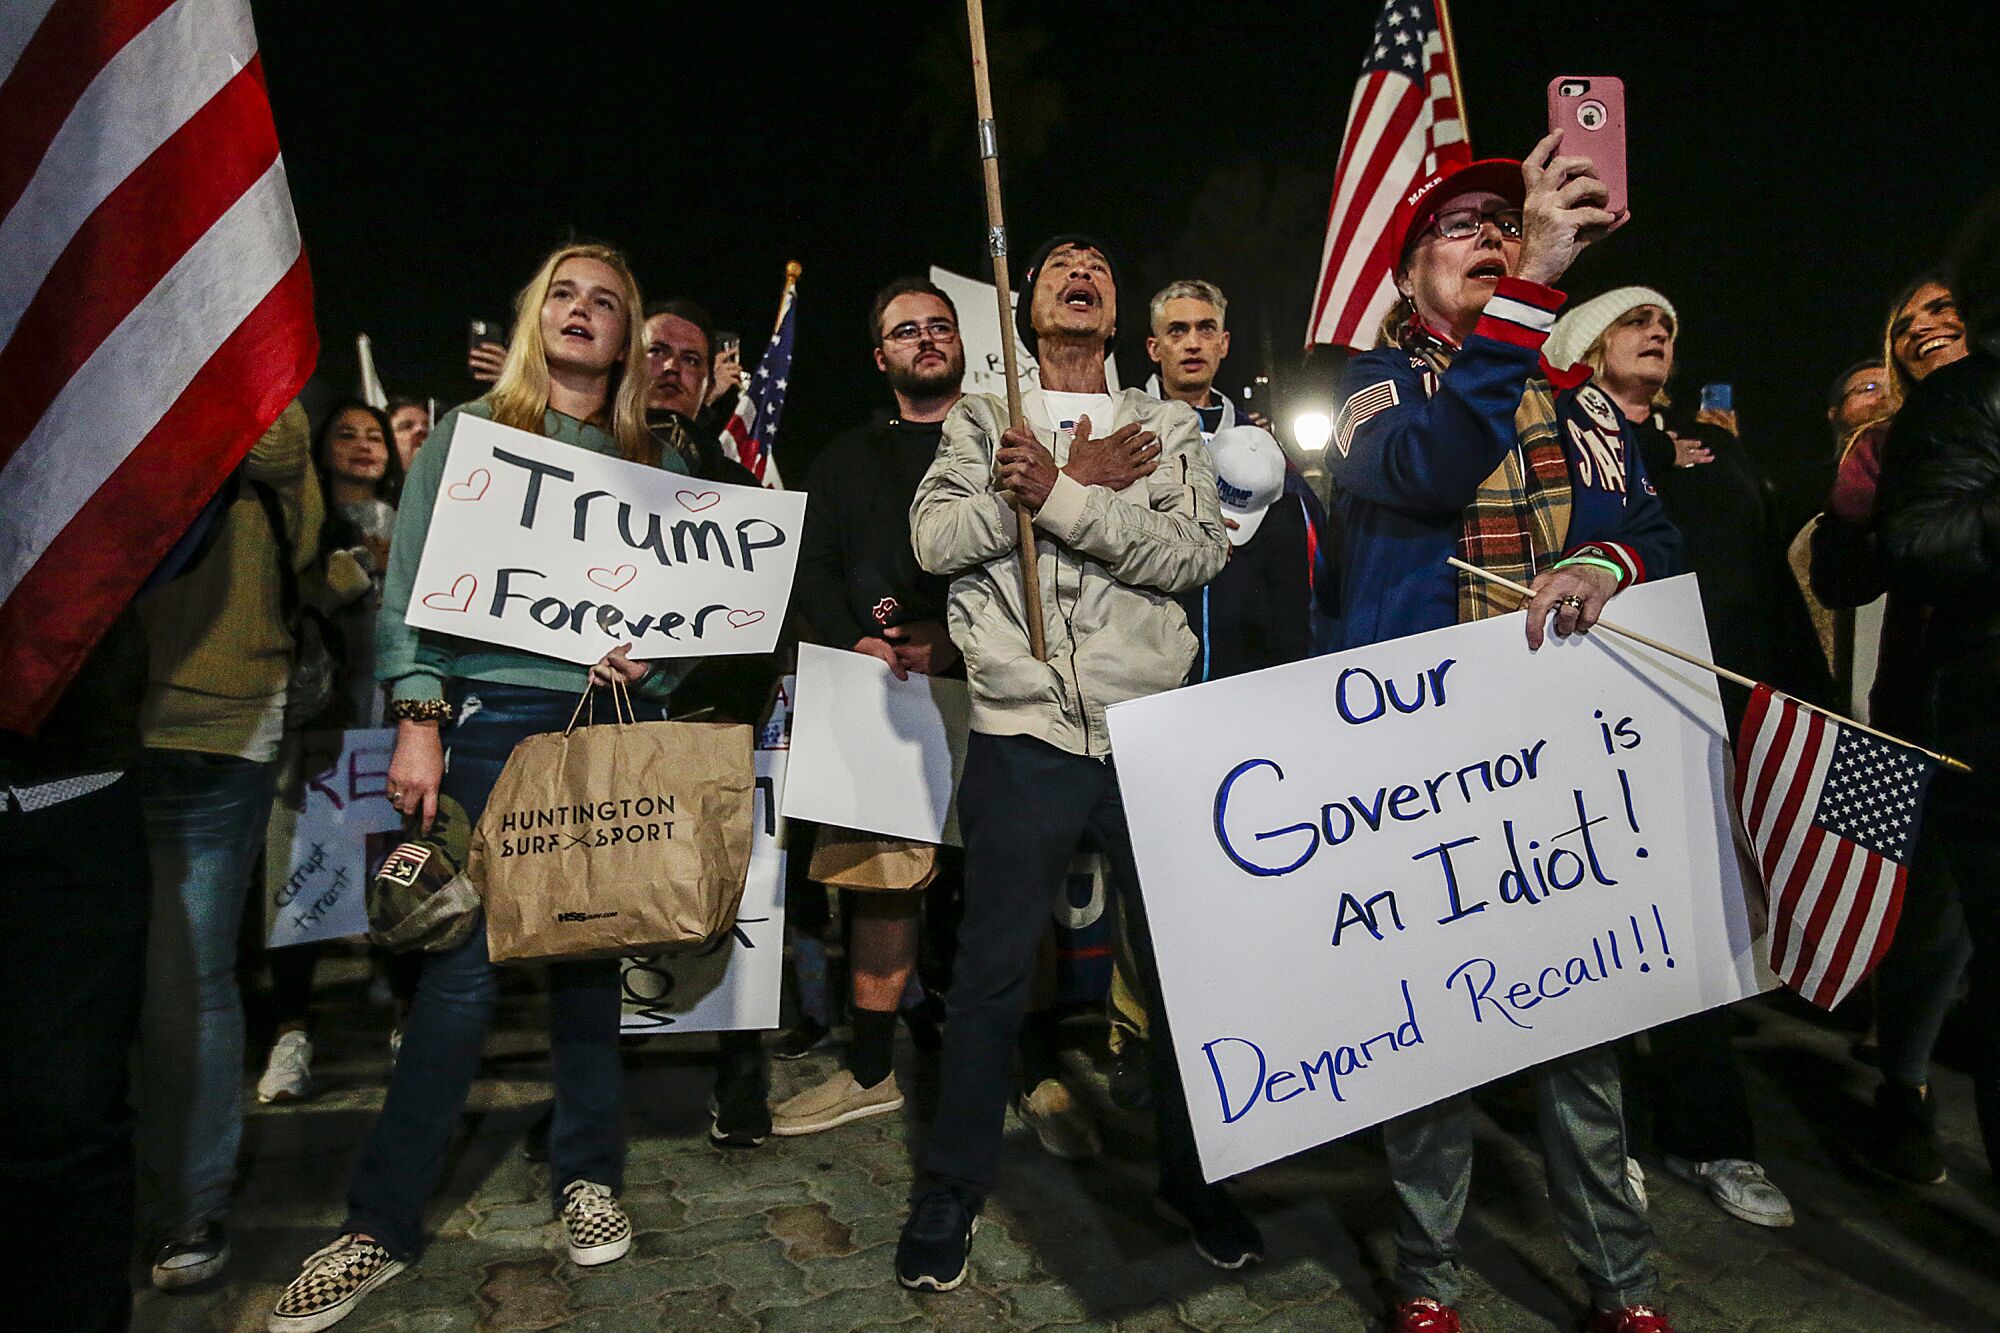 Protesters carry signs reading "Trump Forever" and "Our governor is an idiot."